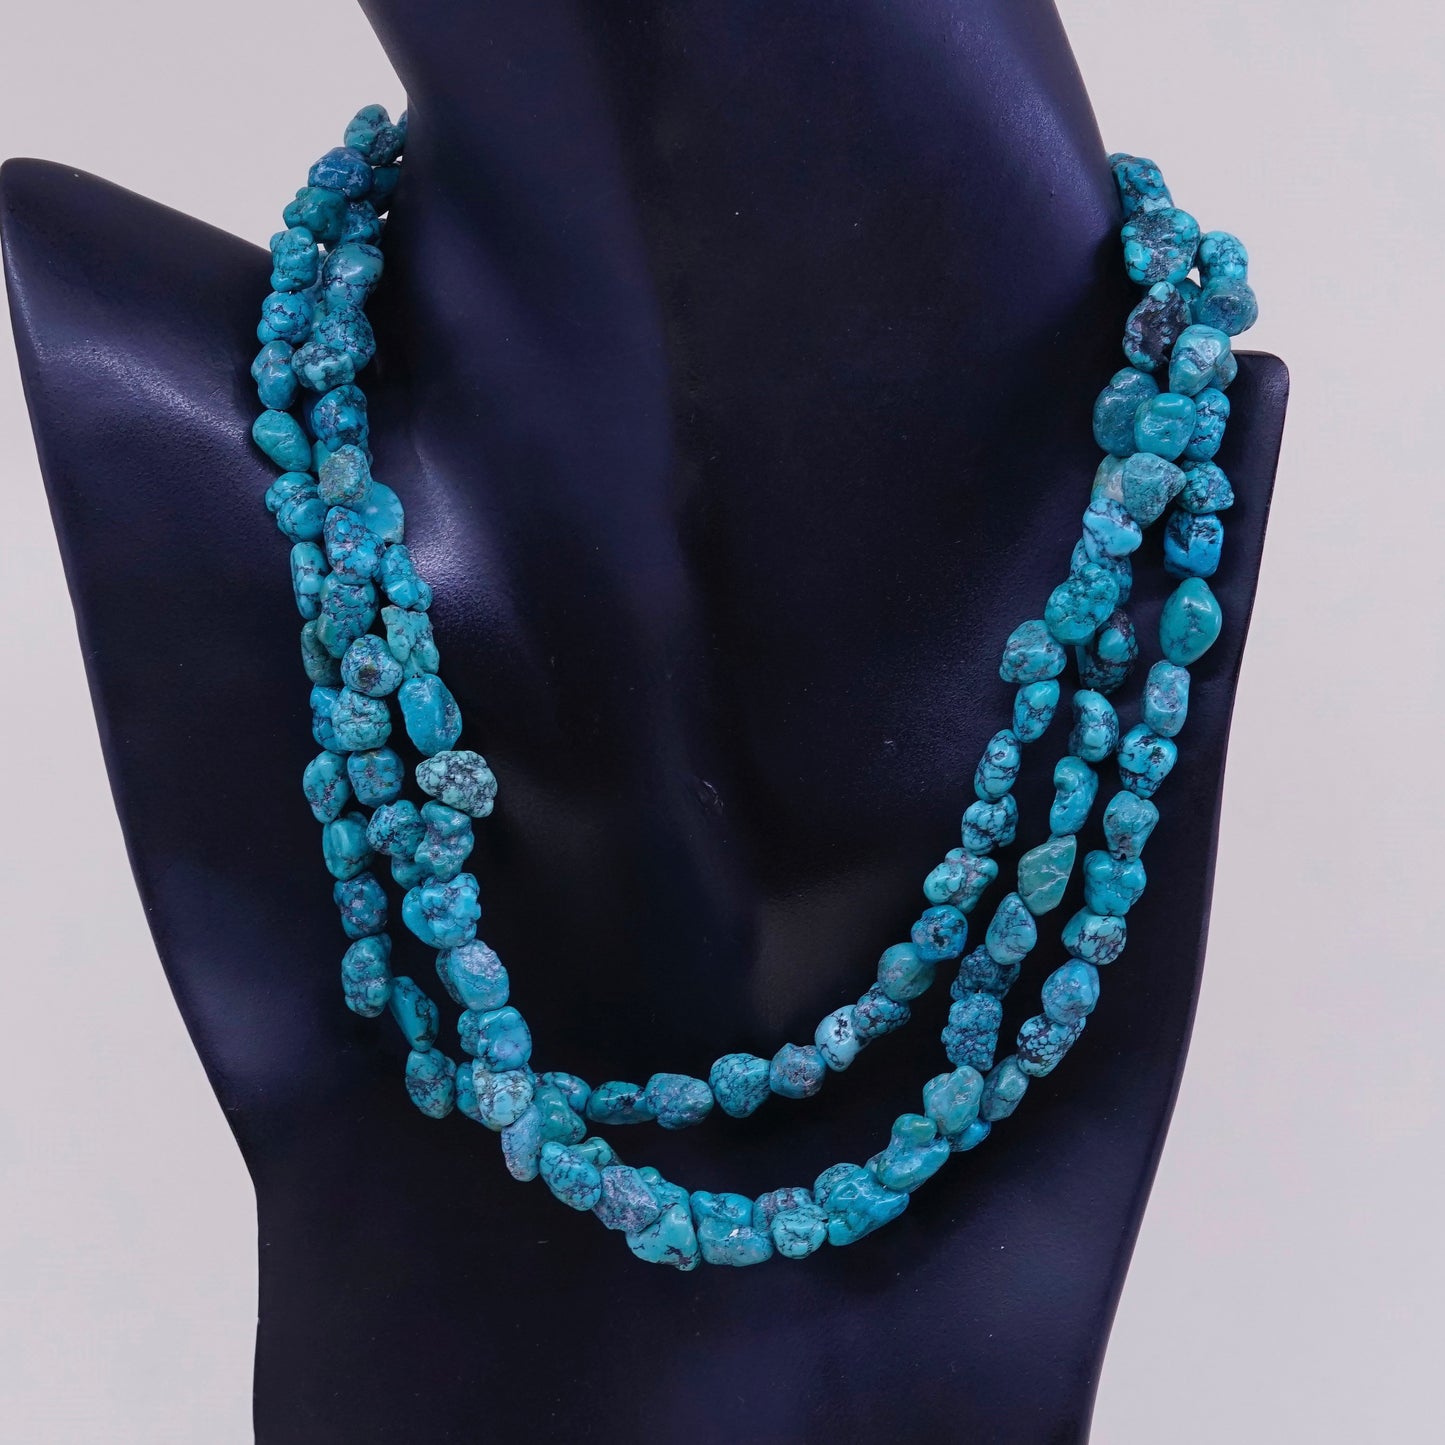 14+2”, turquoise beads necklace, sterling silver 925 w/ spiderwebbed turquoise